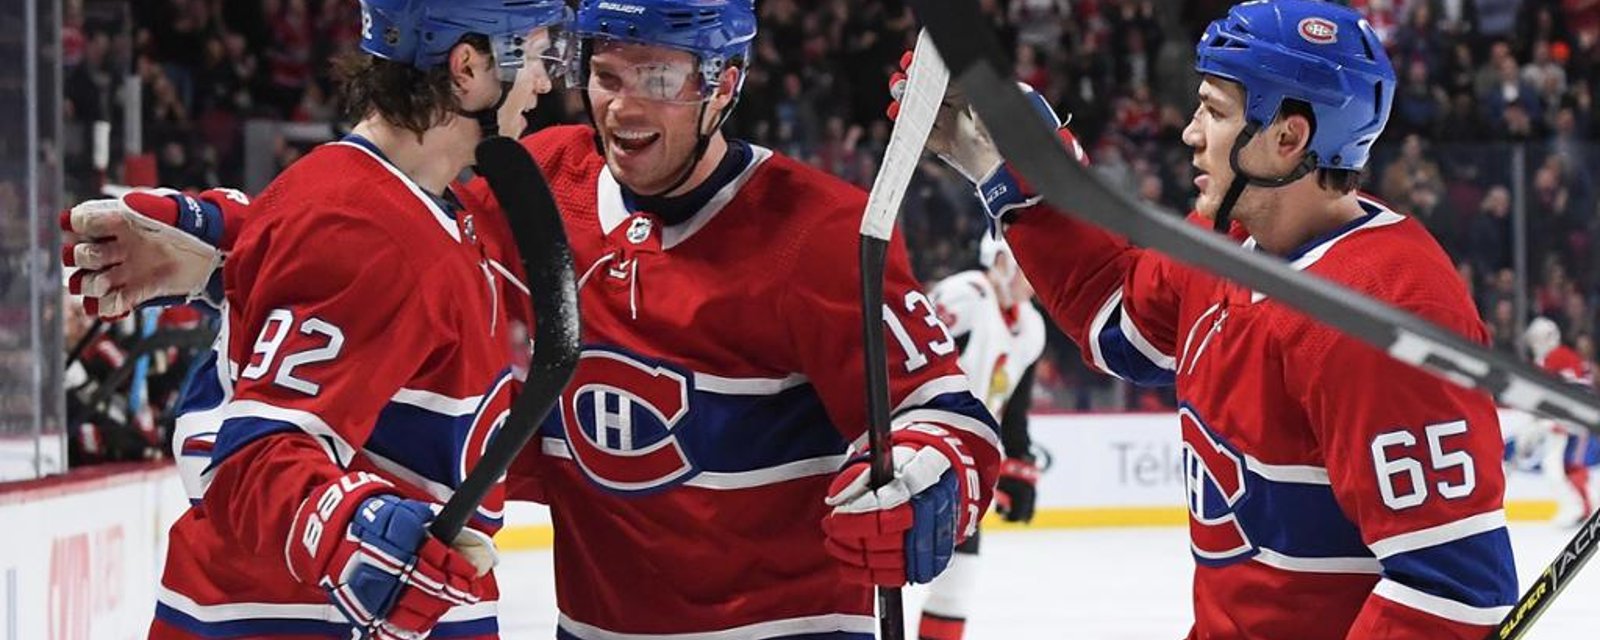 Habs’ star forward is getting driven out of town by fans; will get traded soon! 